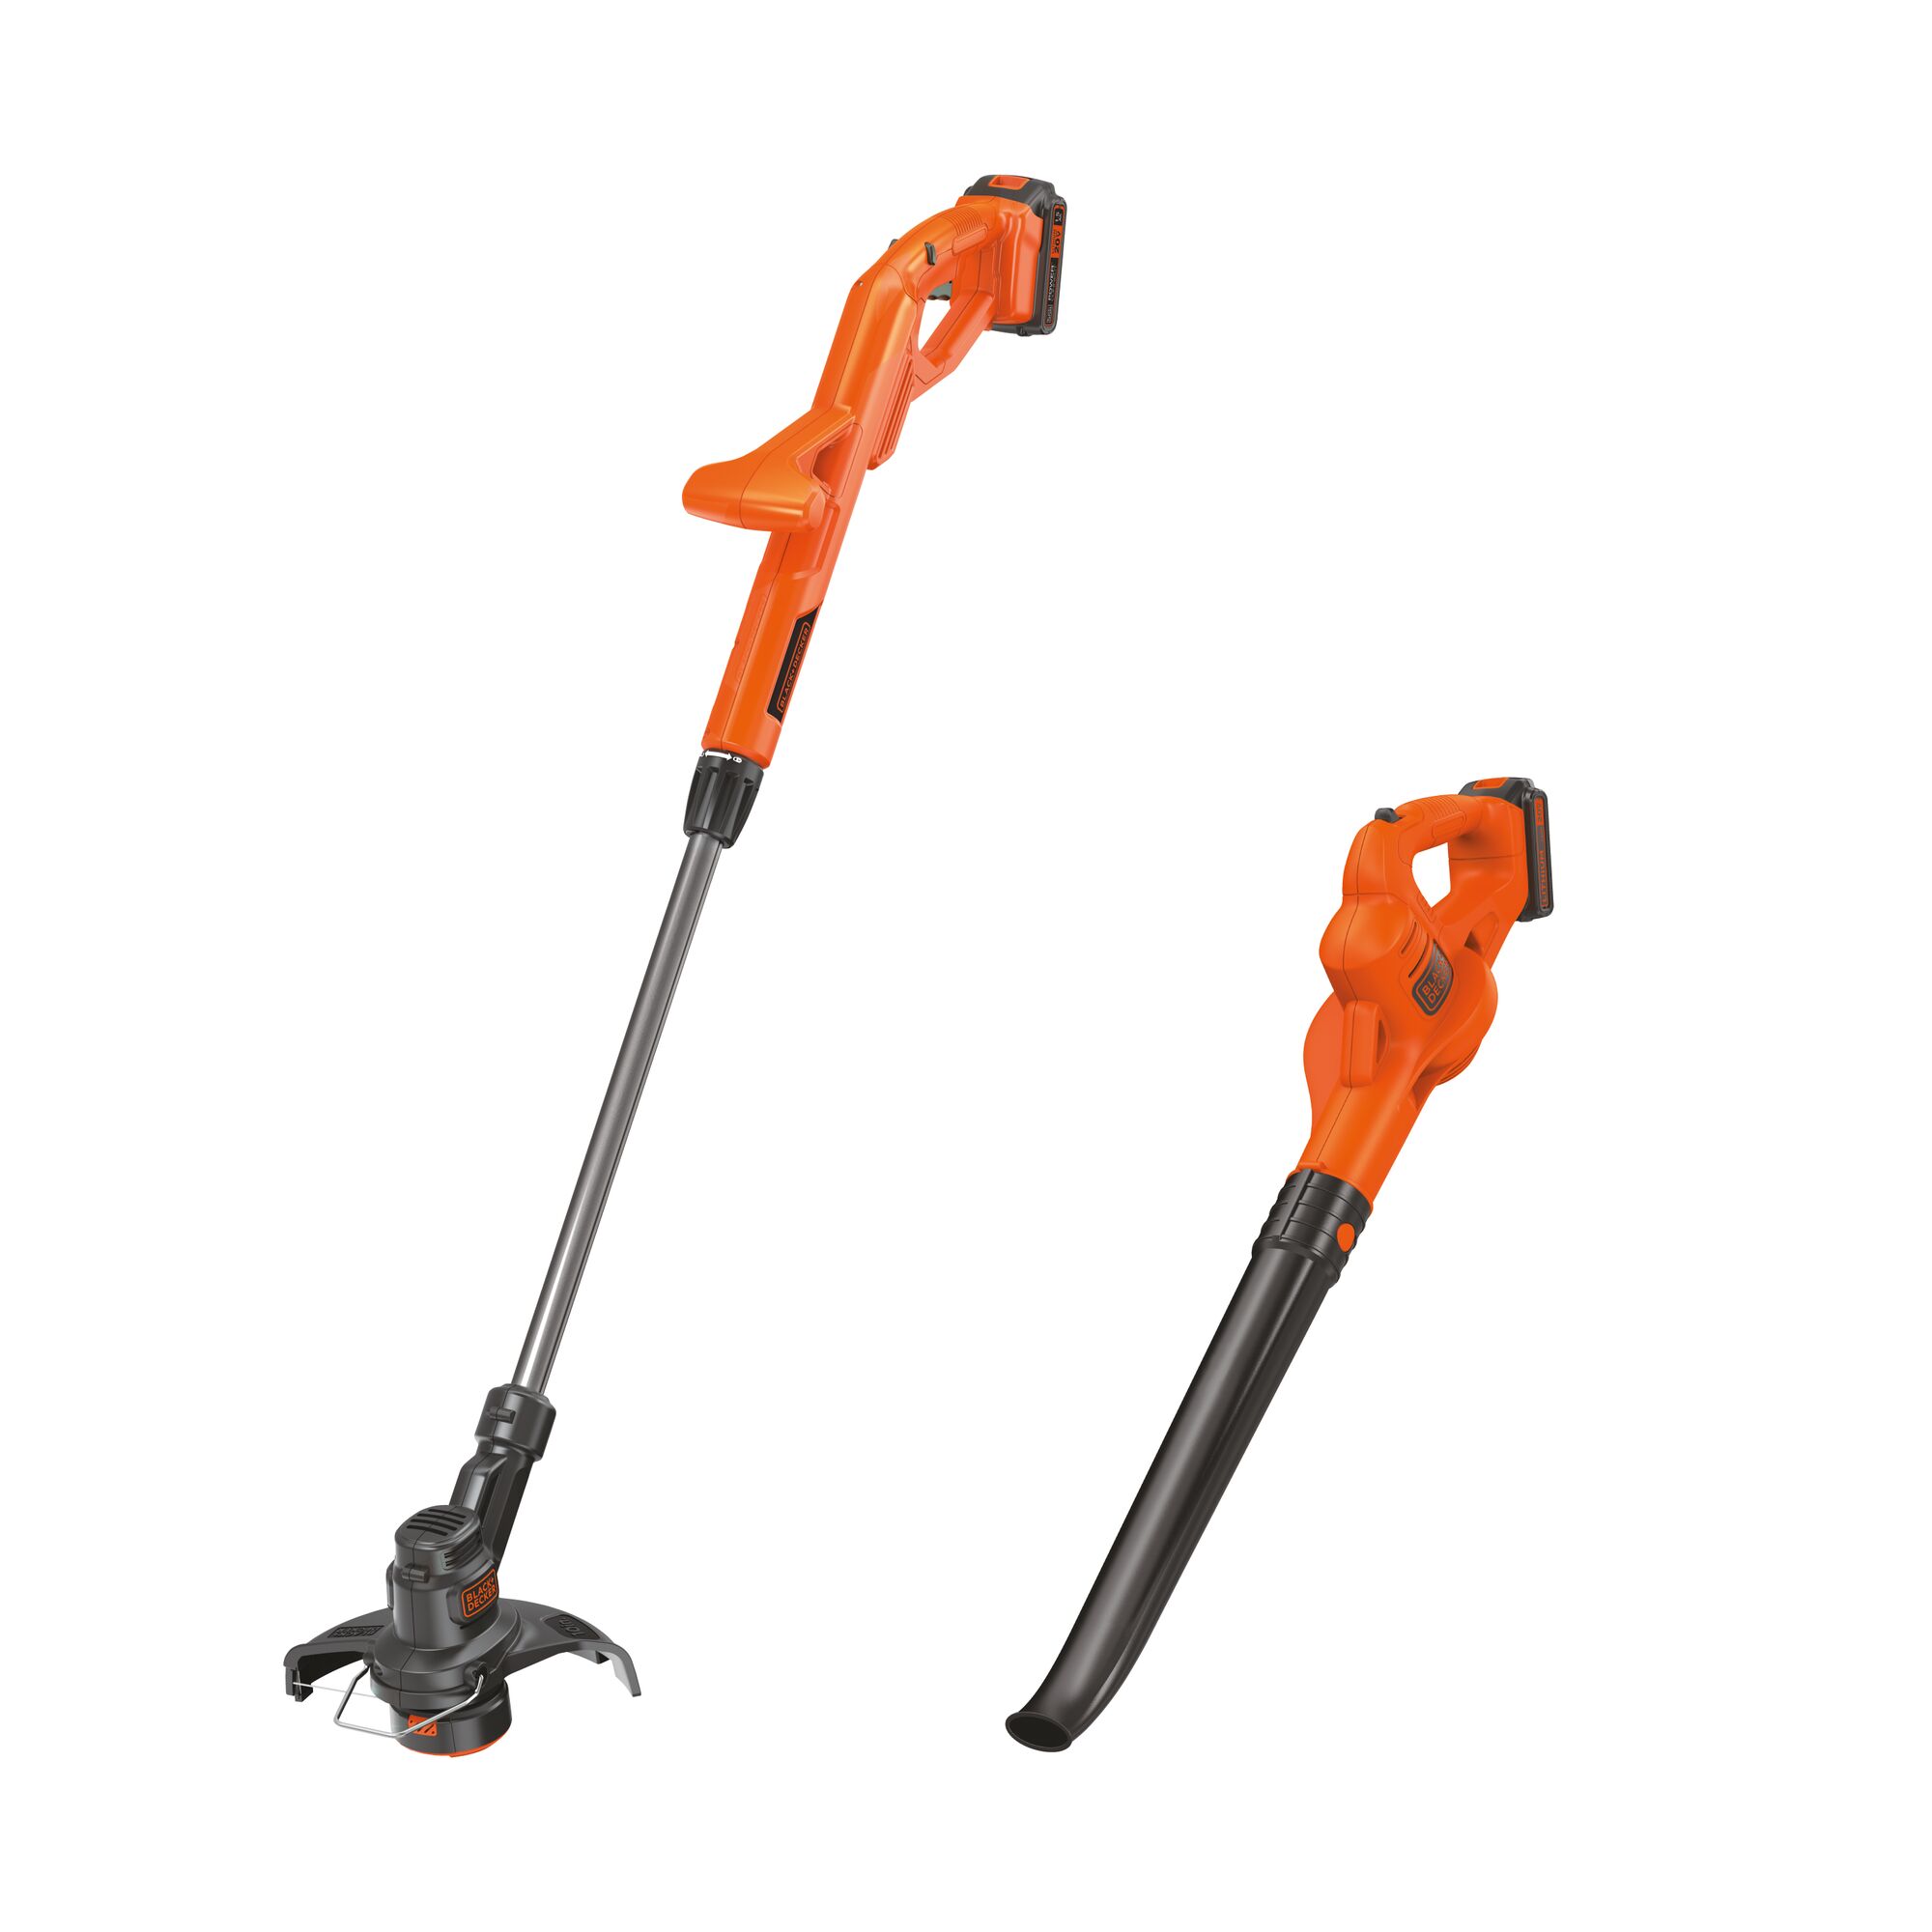 BLACK+DECKER 20 volt max string trimmer and sweeper side by side